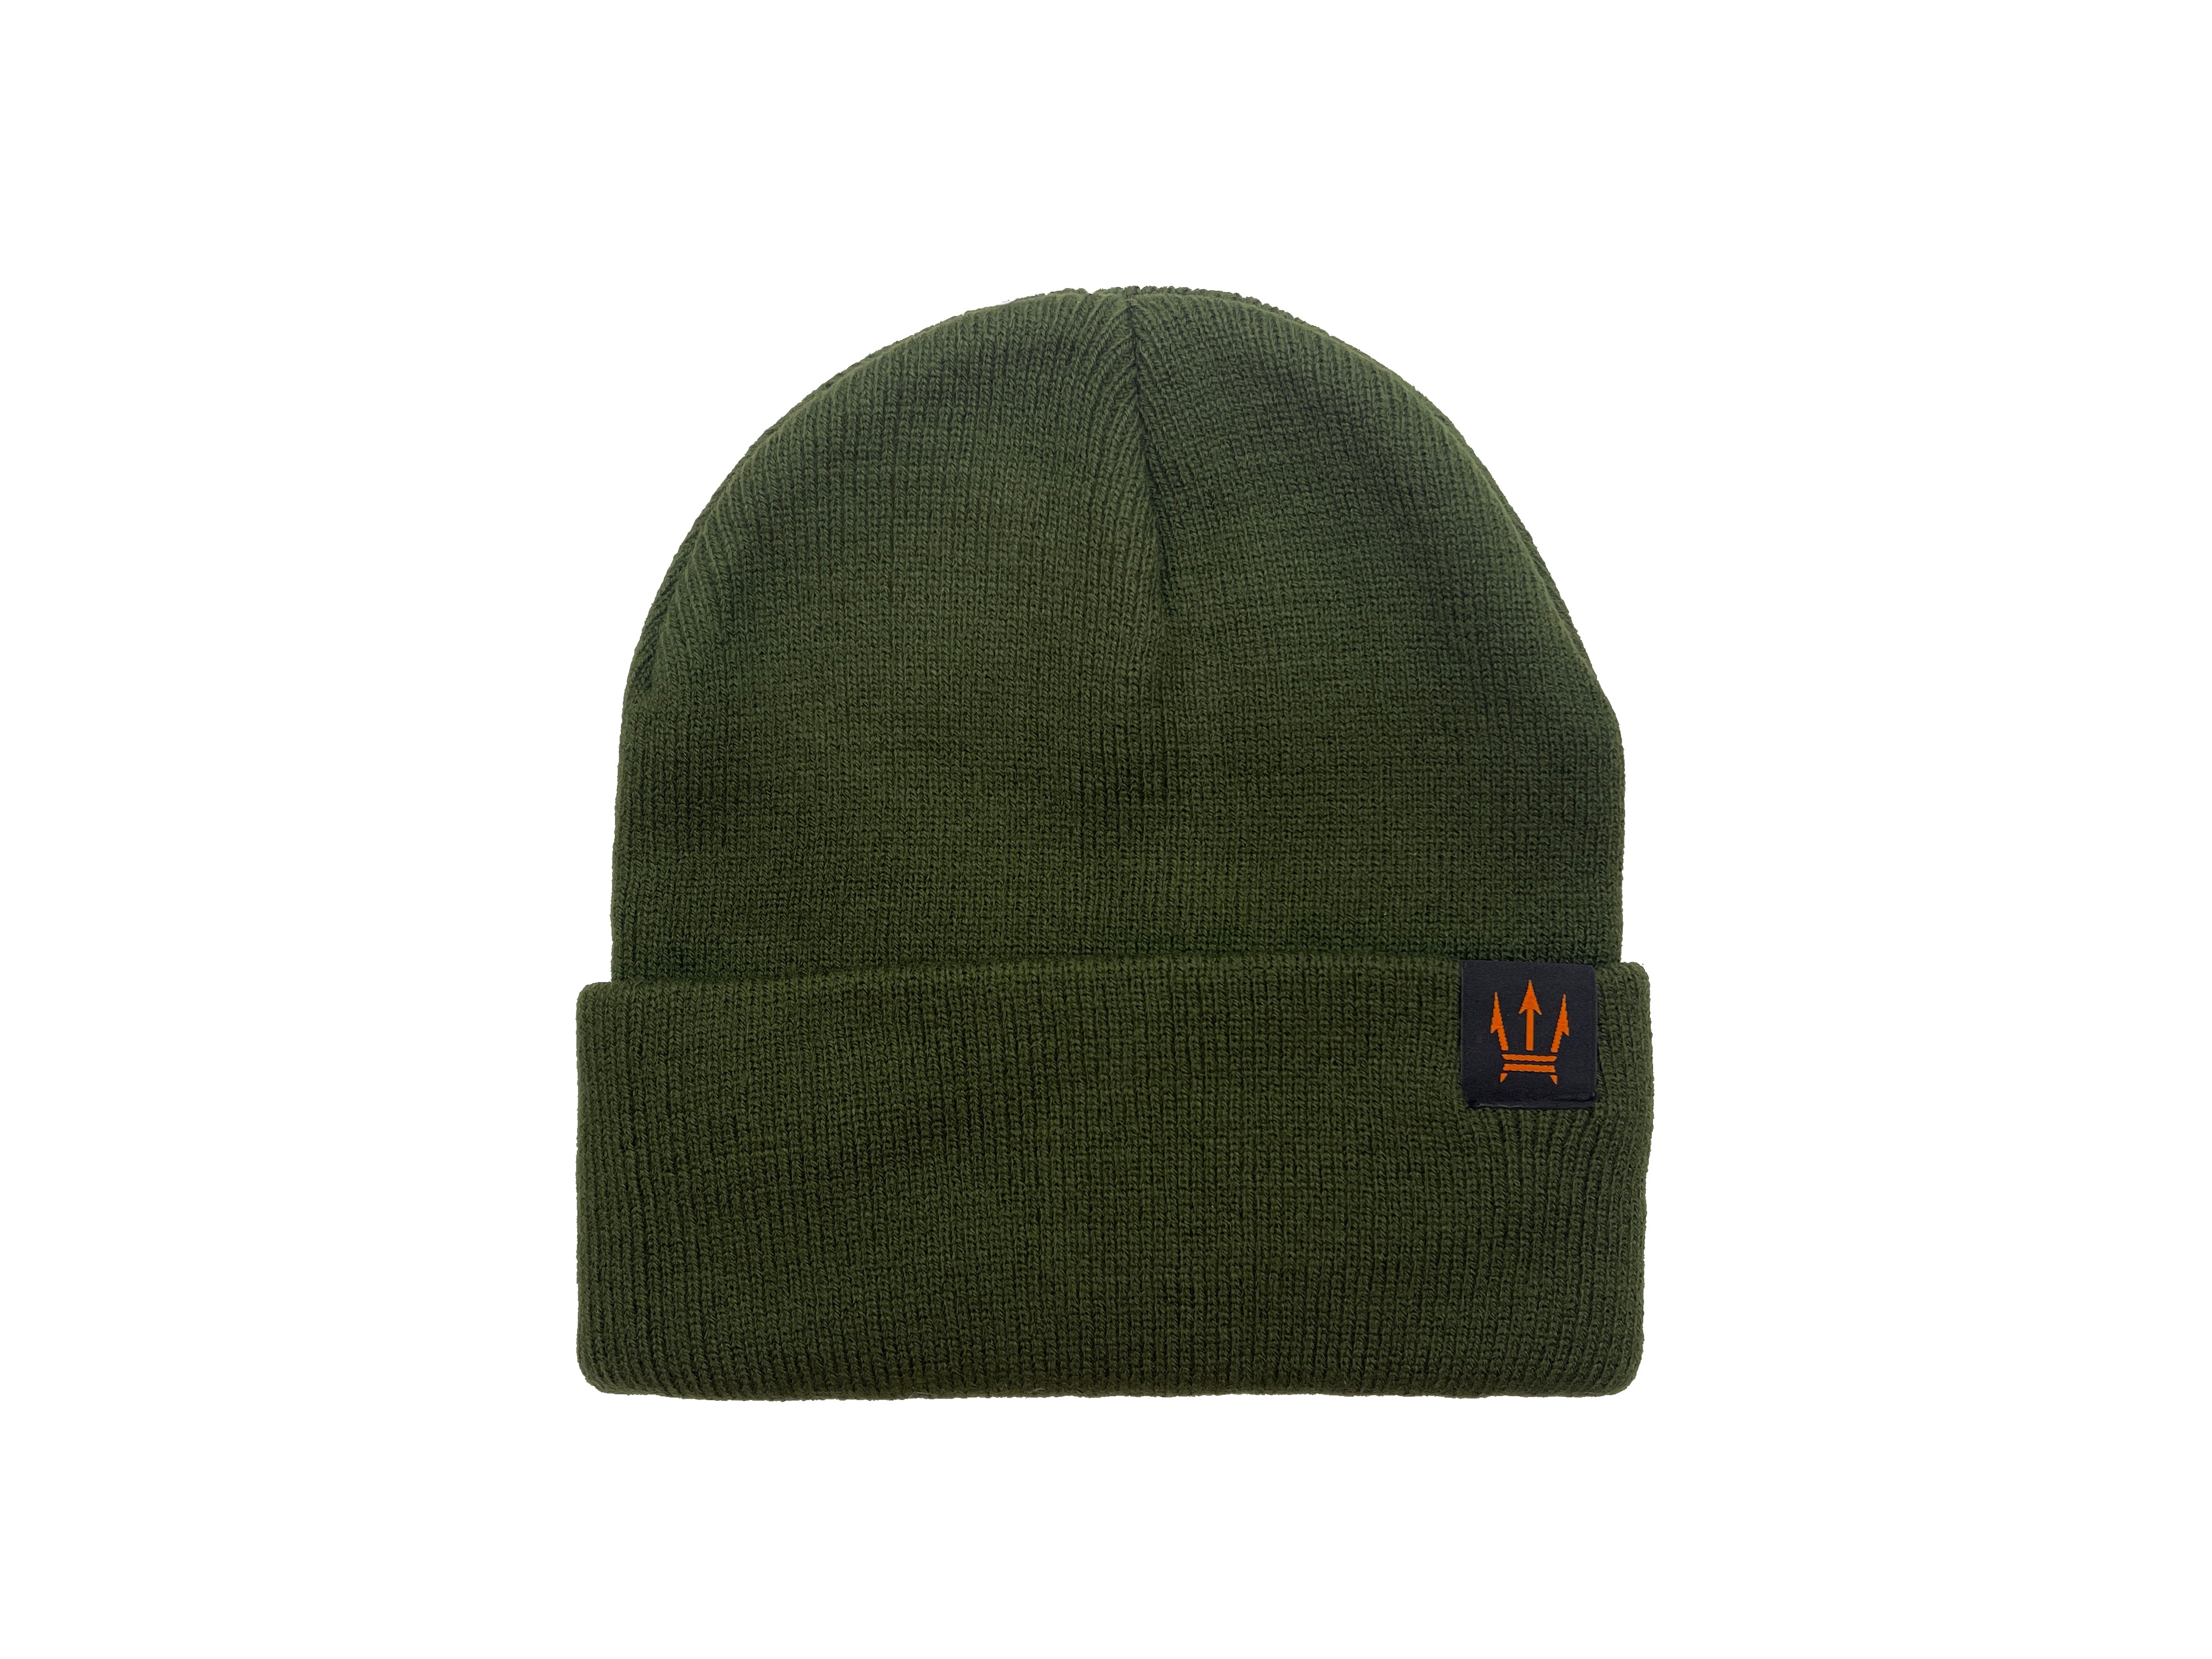 Isotherm - Trident Knit Beanie Maratac® CountyComm – by